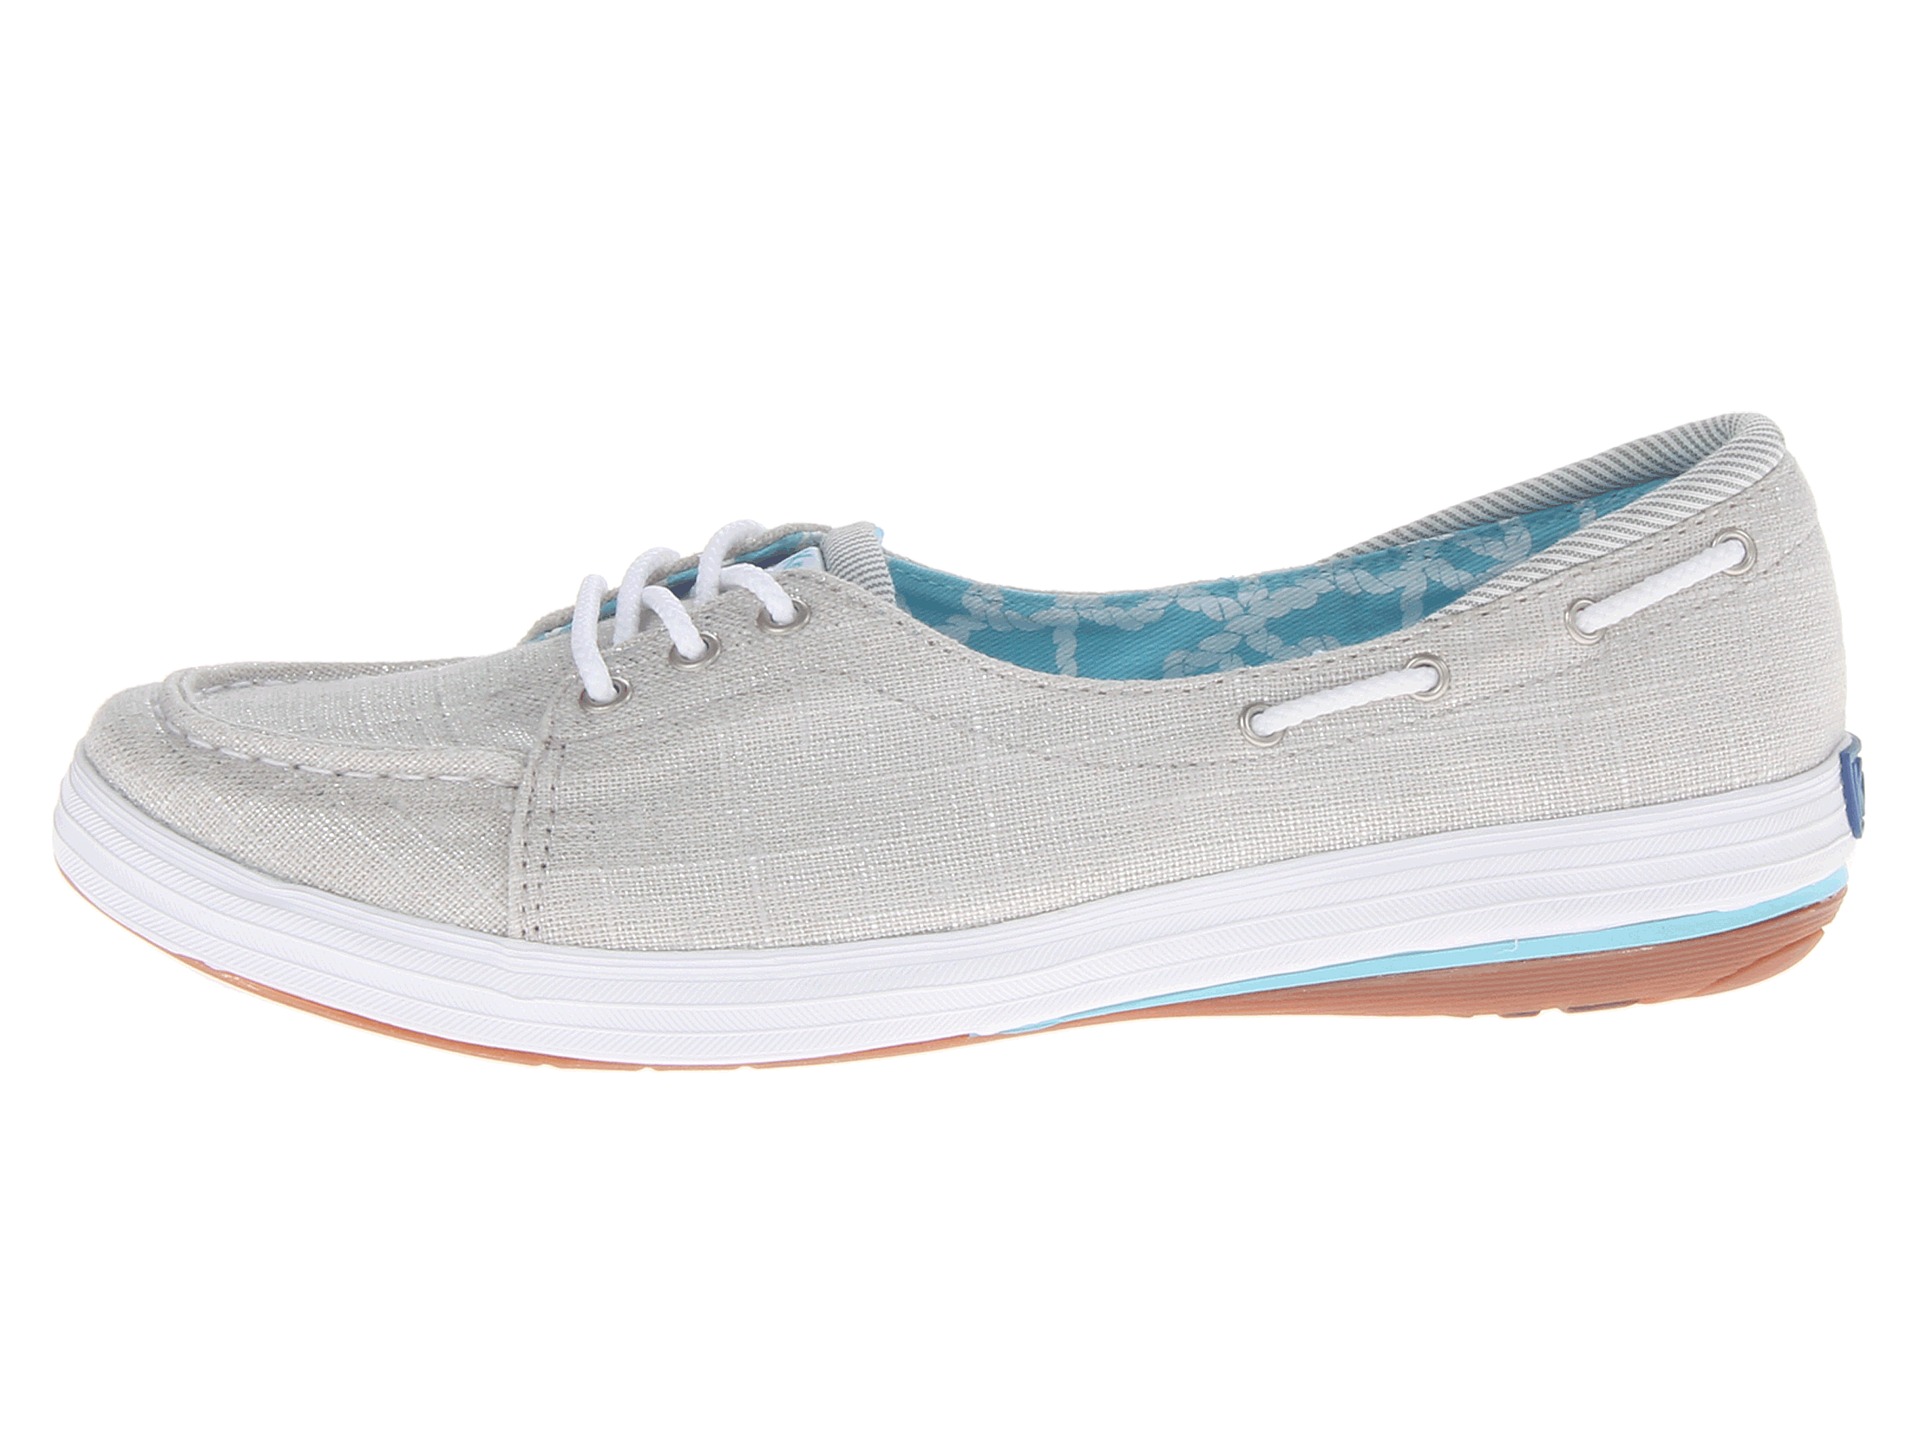 Keds Shine Boat Shoe Silver Brushed Twill | Shipped Free at Zappos